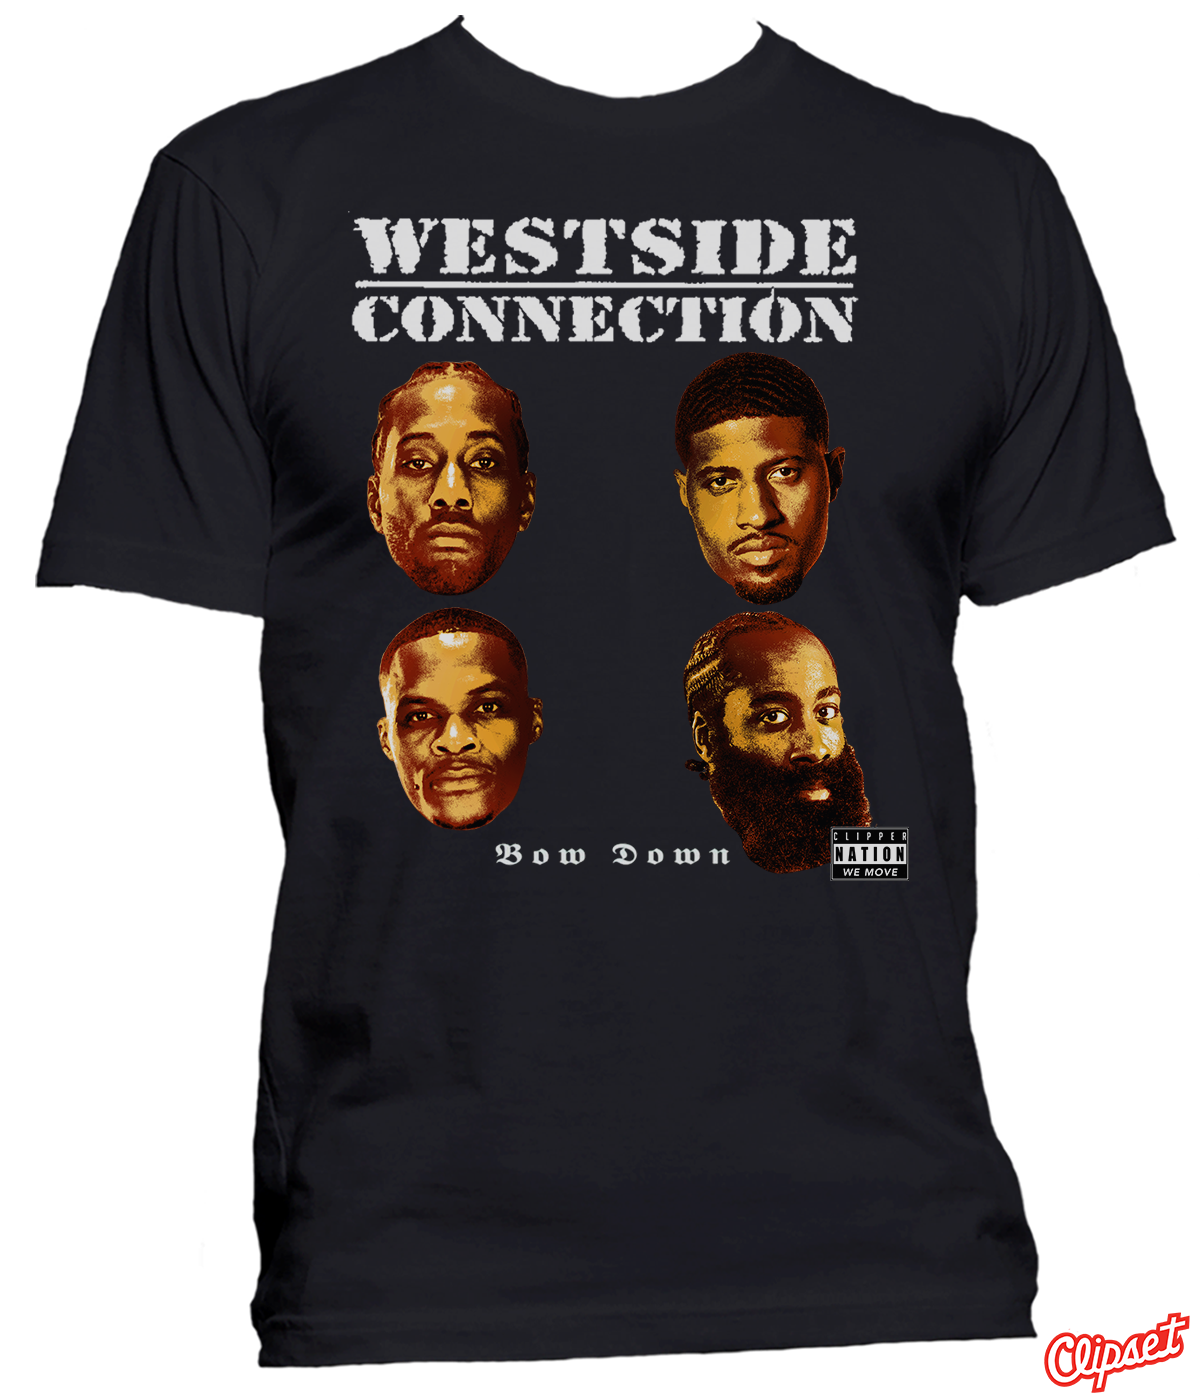 The Westside Connection tee